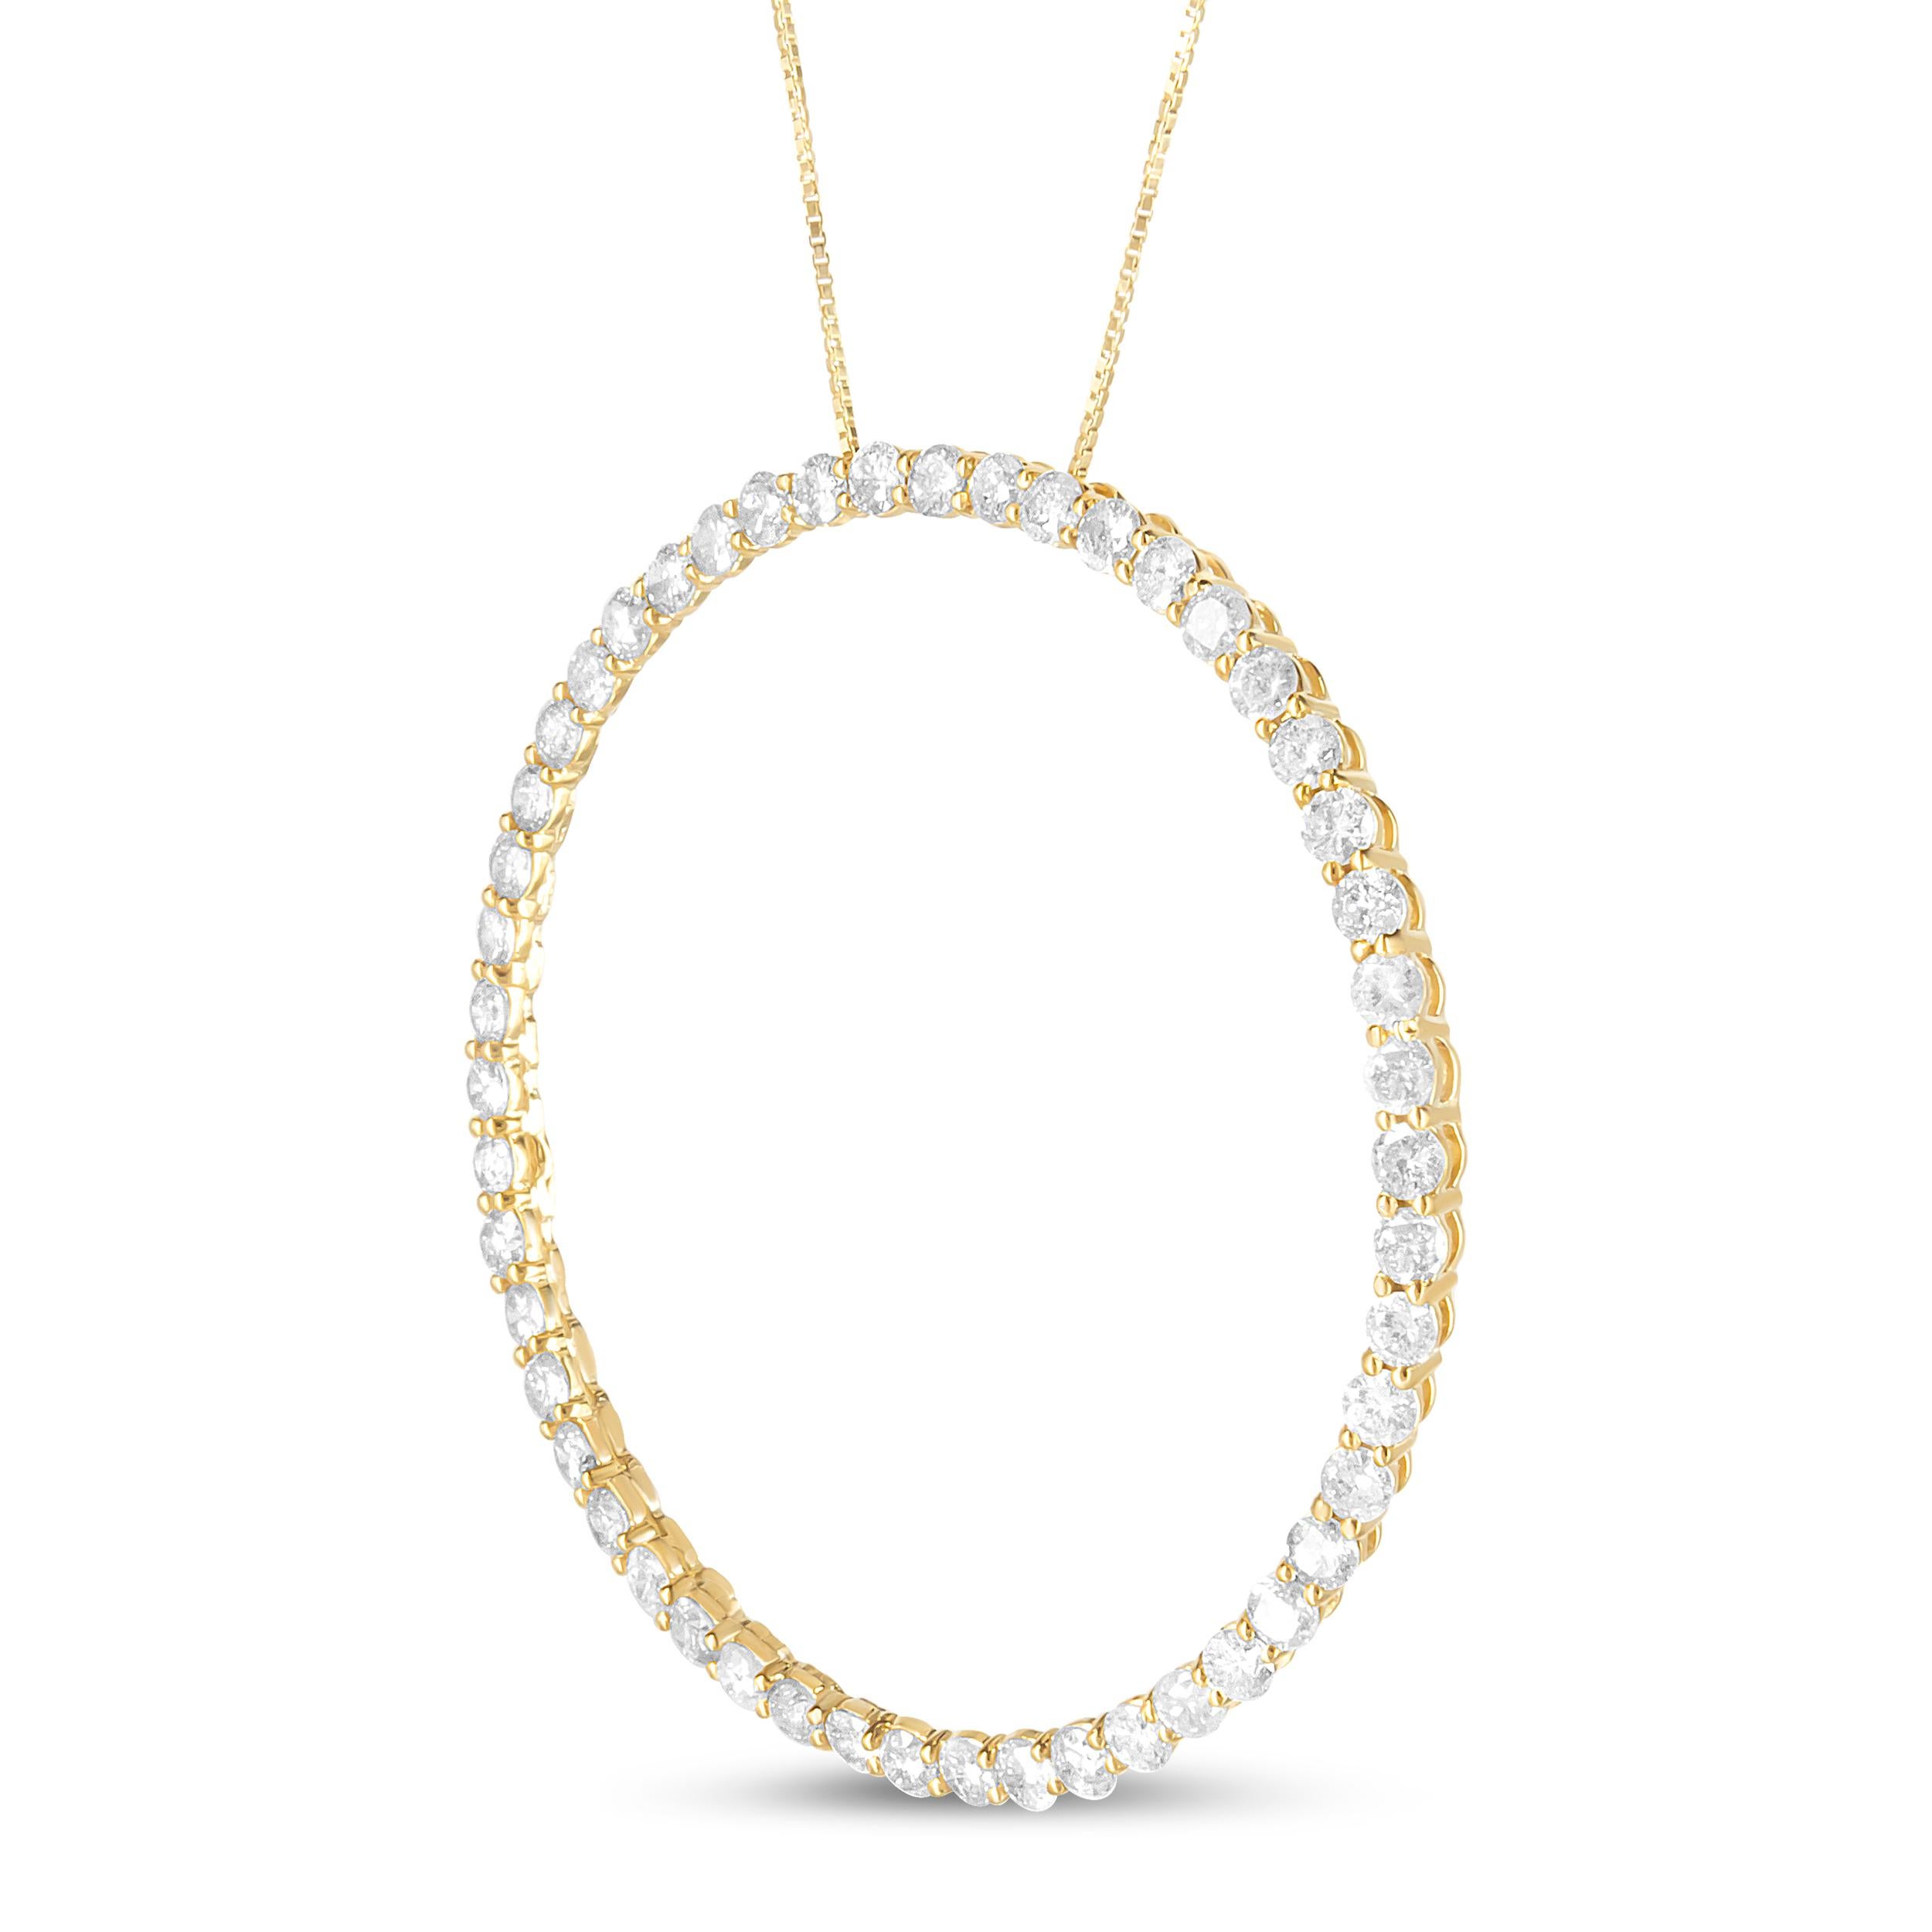 10K Yellow Gold Plated Silver 4.0 Cttw Diamond Circle Hoop Pendant Necklace In New Condition For Sale In New York, NY